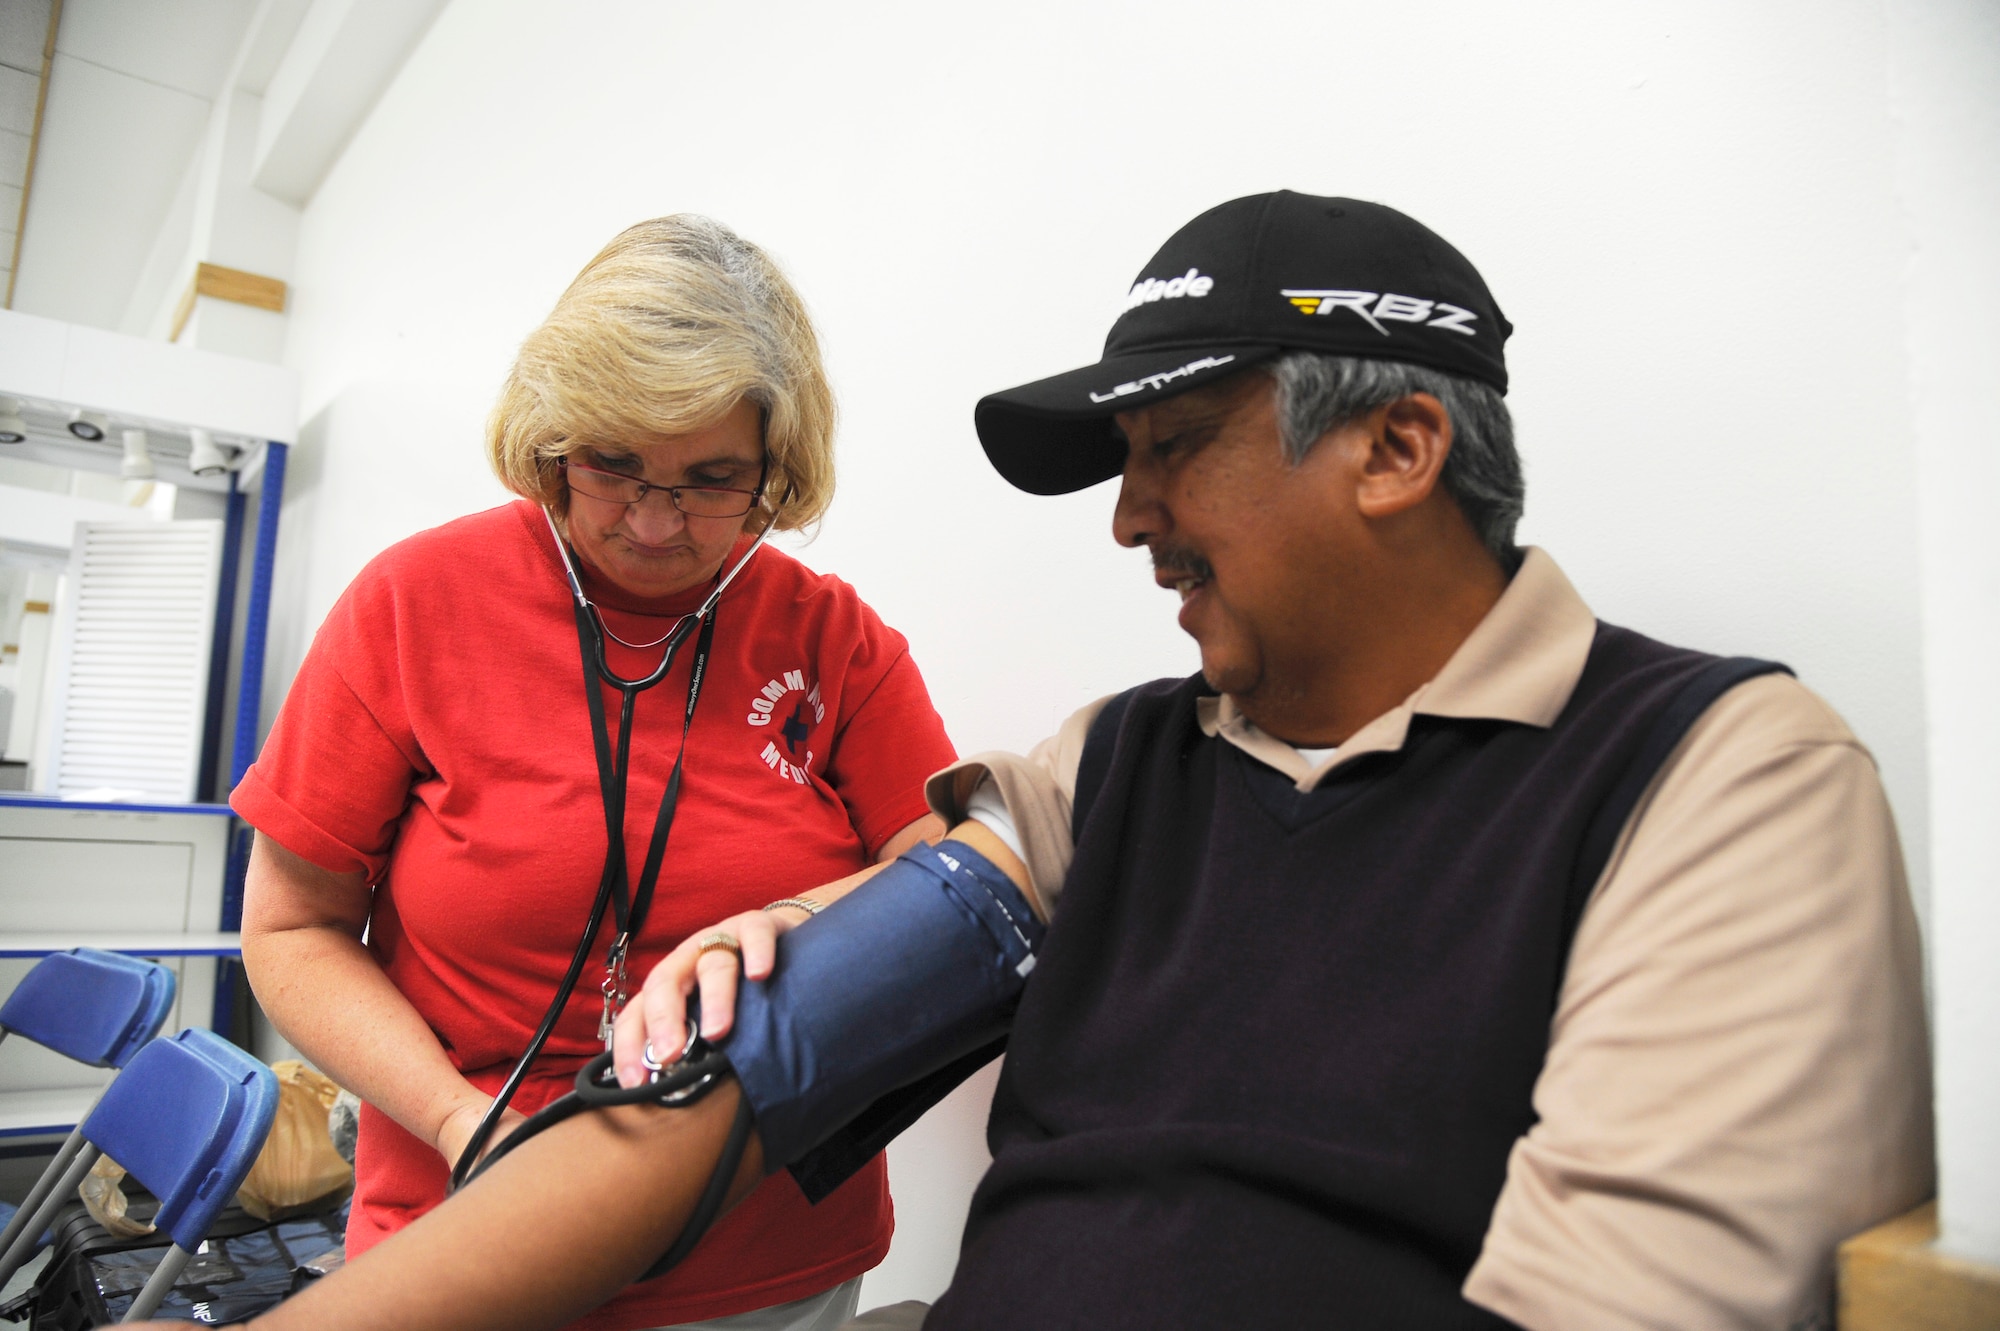 Martha Nobles, Certified Nursing Assistant, takes a patient’s blood pressure during Retiree Appreciation Day at the Base Exchange on Hurlburt Field, Fla., Sept. 25, 2014. The event offered participants free blood pressure checks and flu-shots. (U.S. Air Force photo/Staff Sgt. Sarah Hanson)